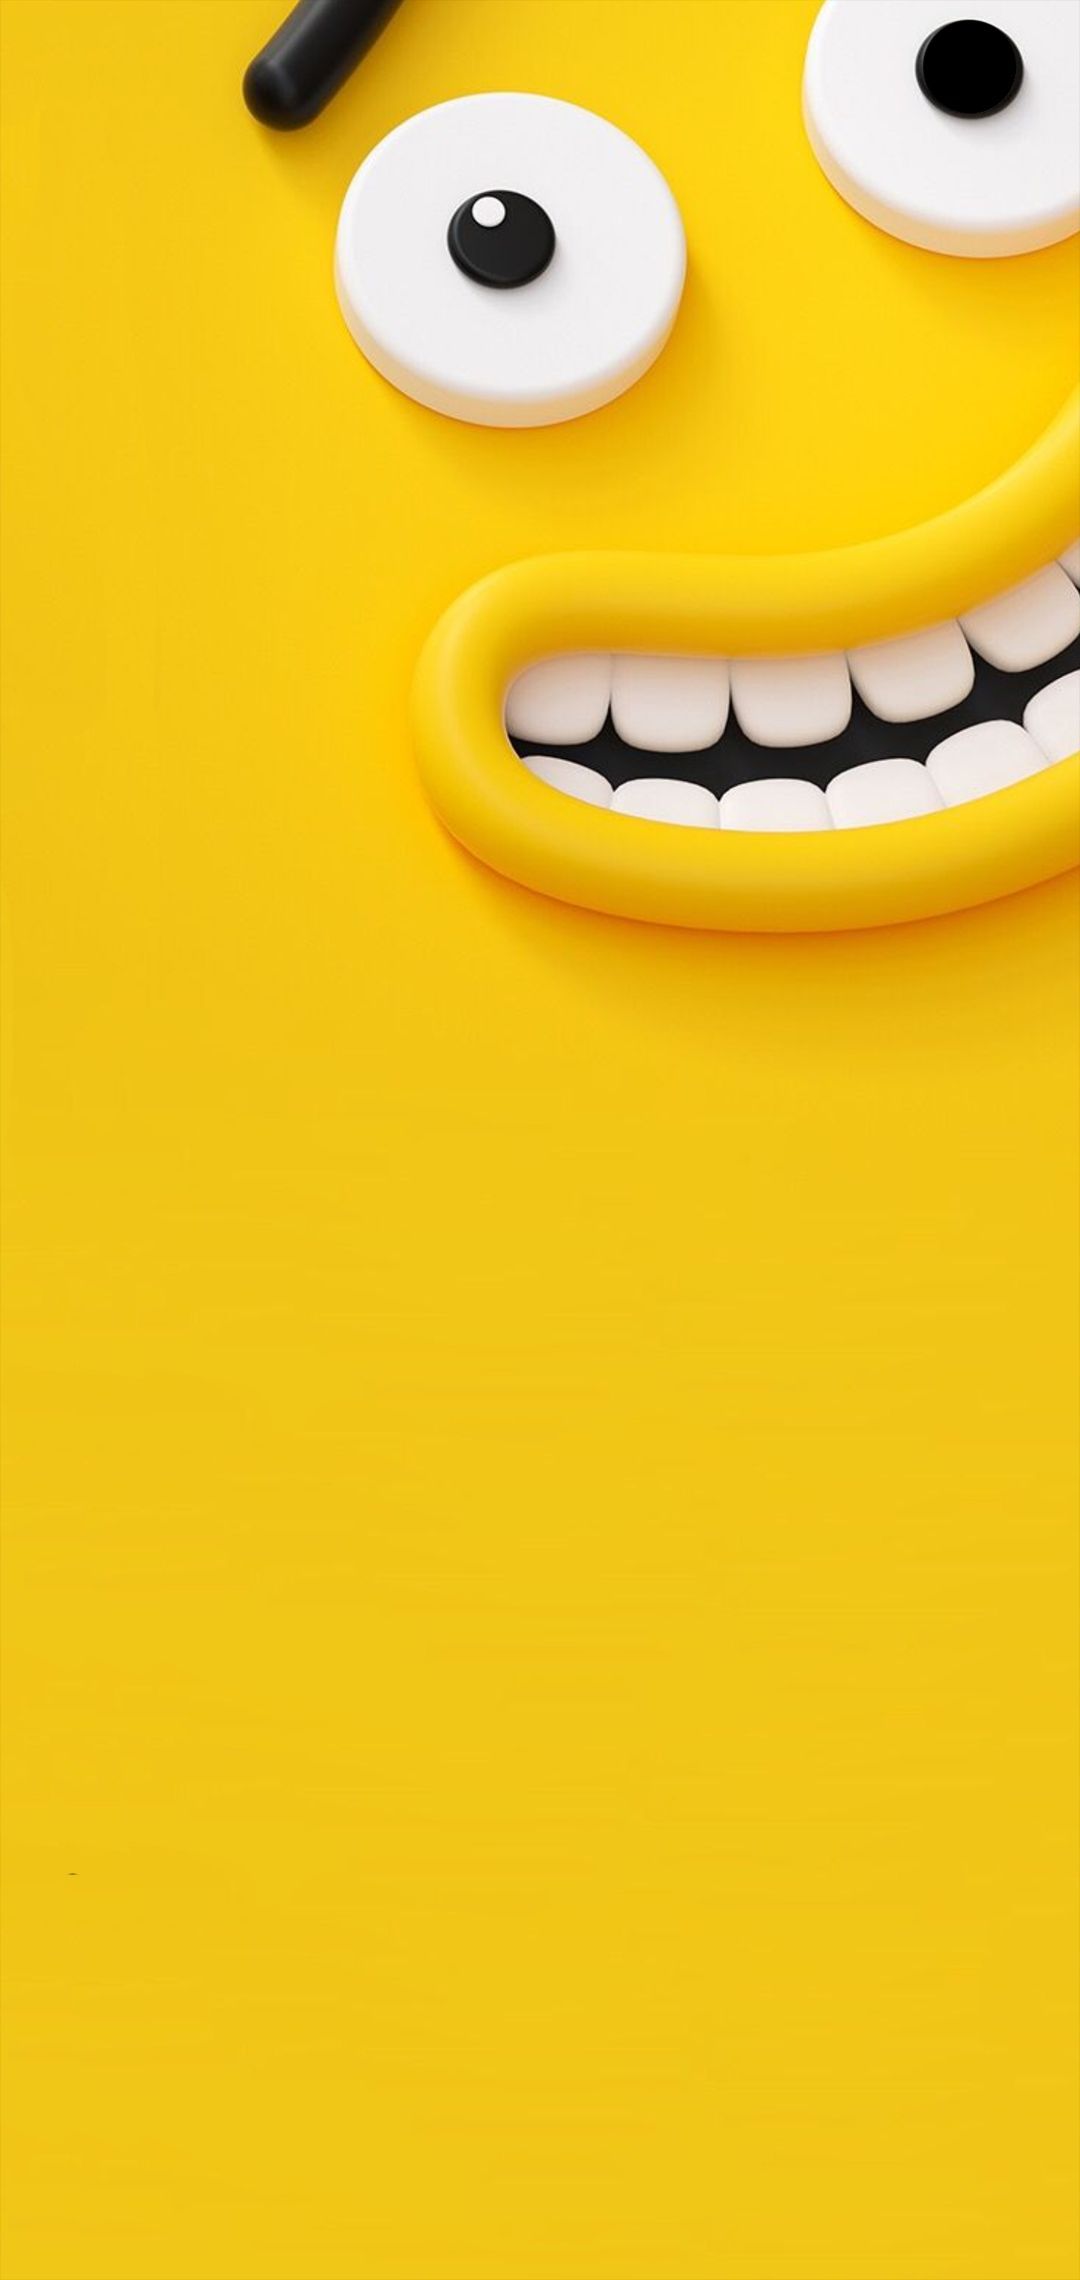 99+] Punch-Hole Wallpapers for Samsung Galaxy Note 10 (Plus)